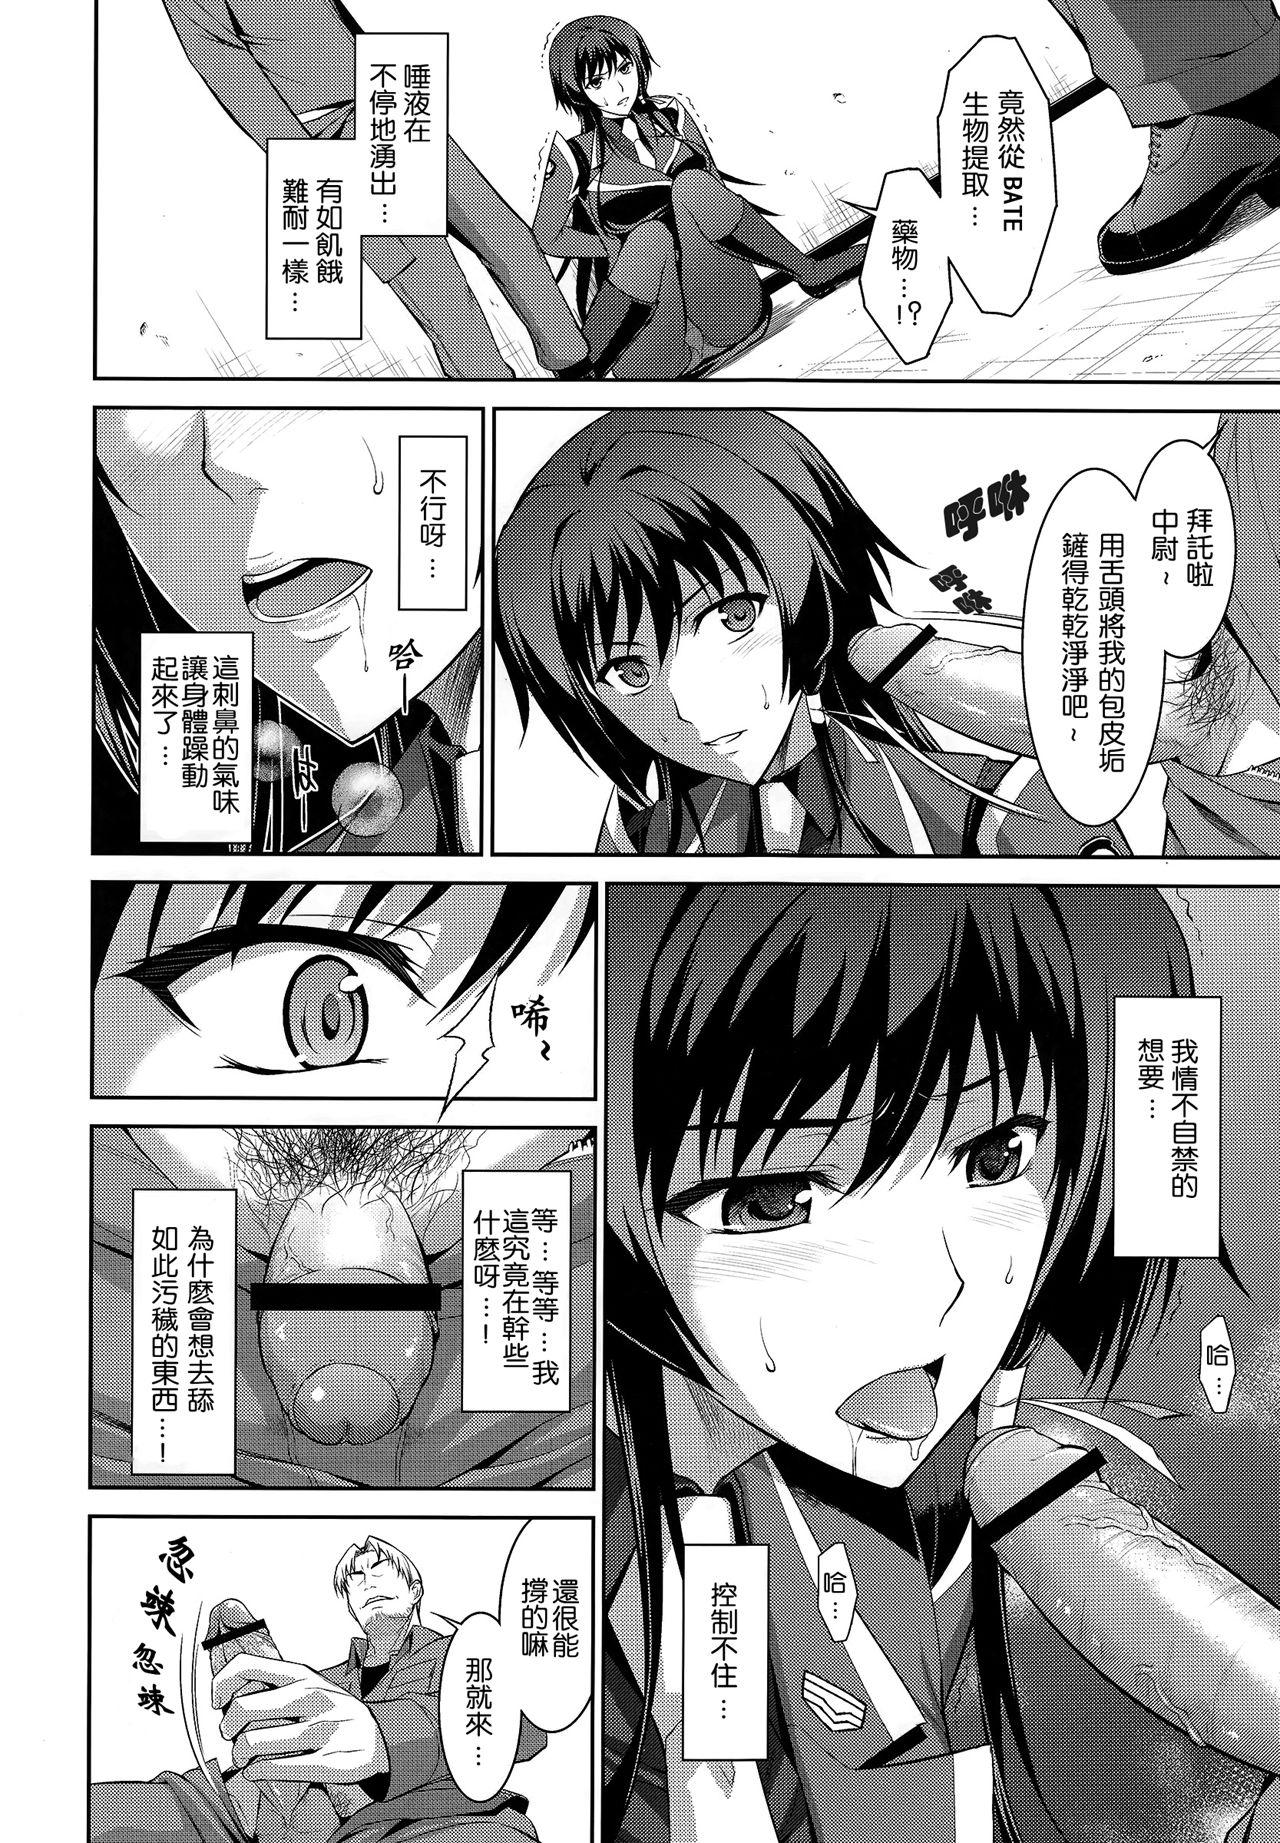 Oldyoung Ouka Chiru! - Muv luv alternative total eclipse Gay Cut - Page 10